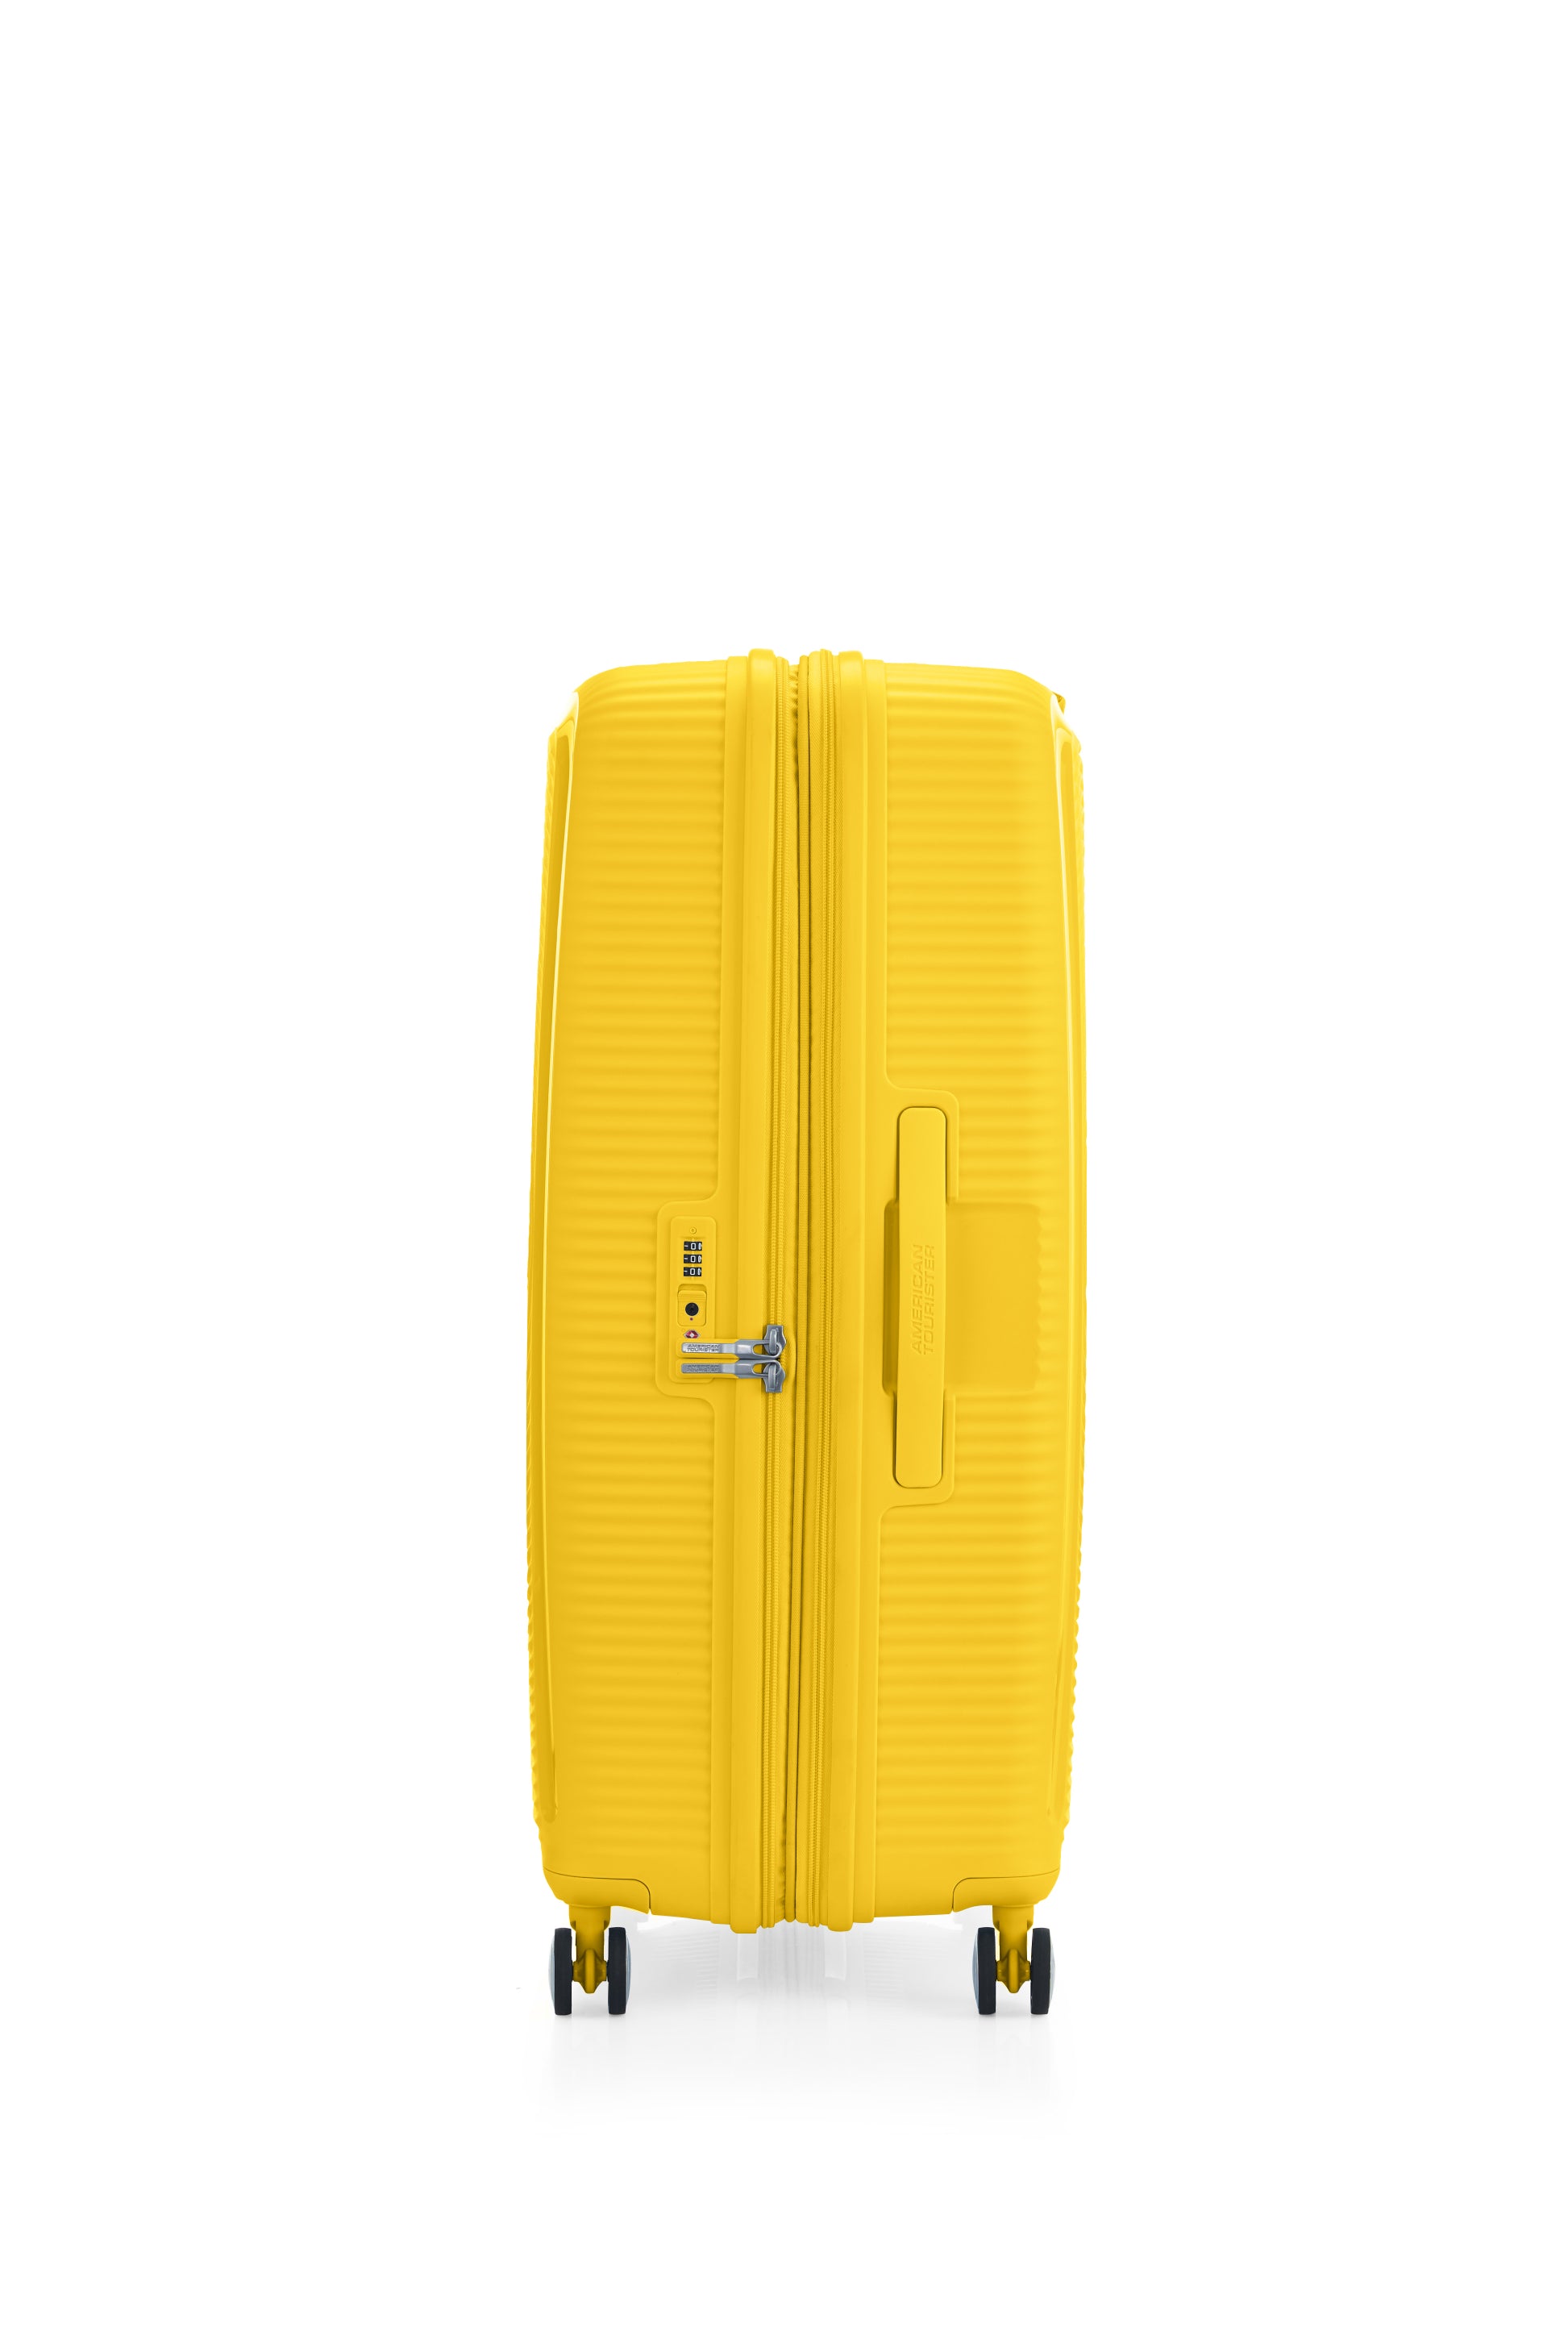 American Tourister - Curio 2.0 80cm Large Suitcase - Golden Yellow-4